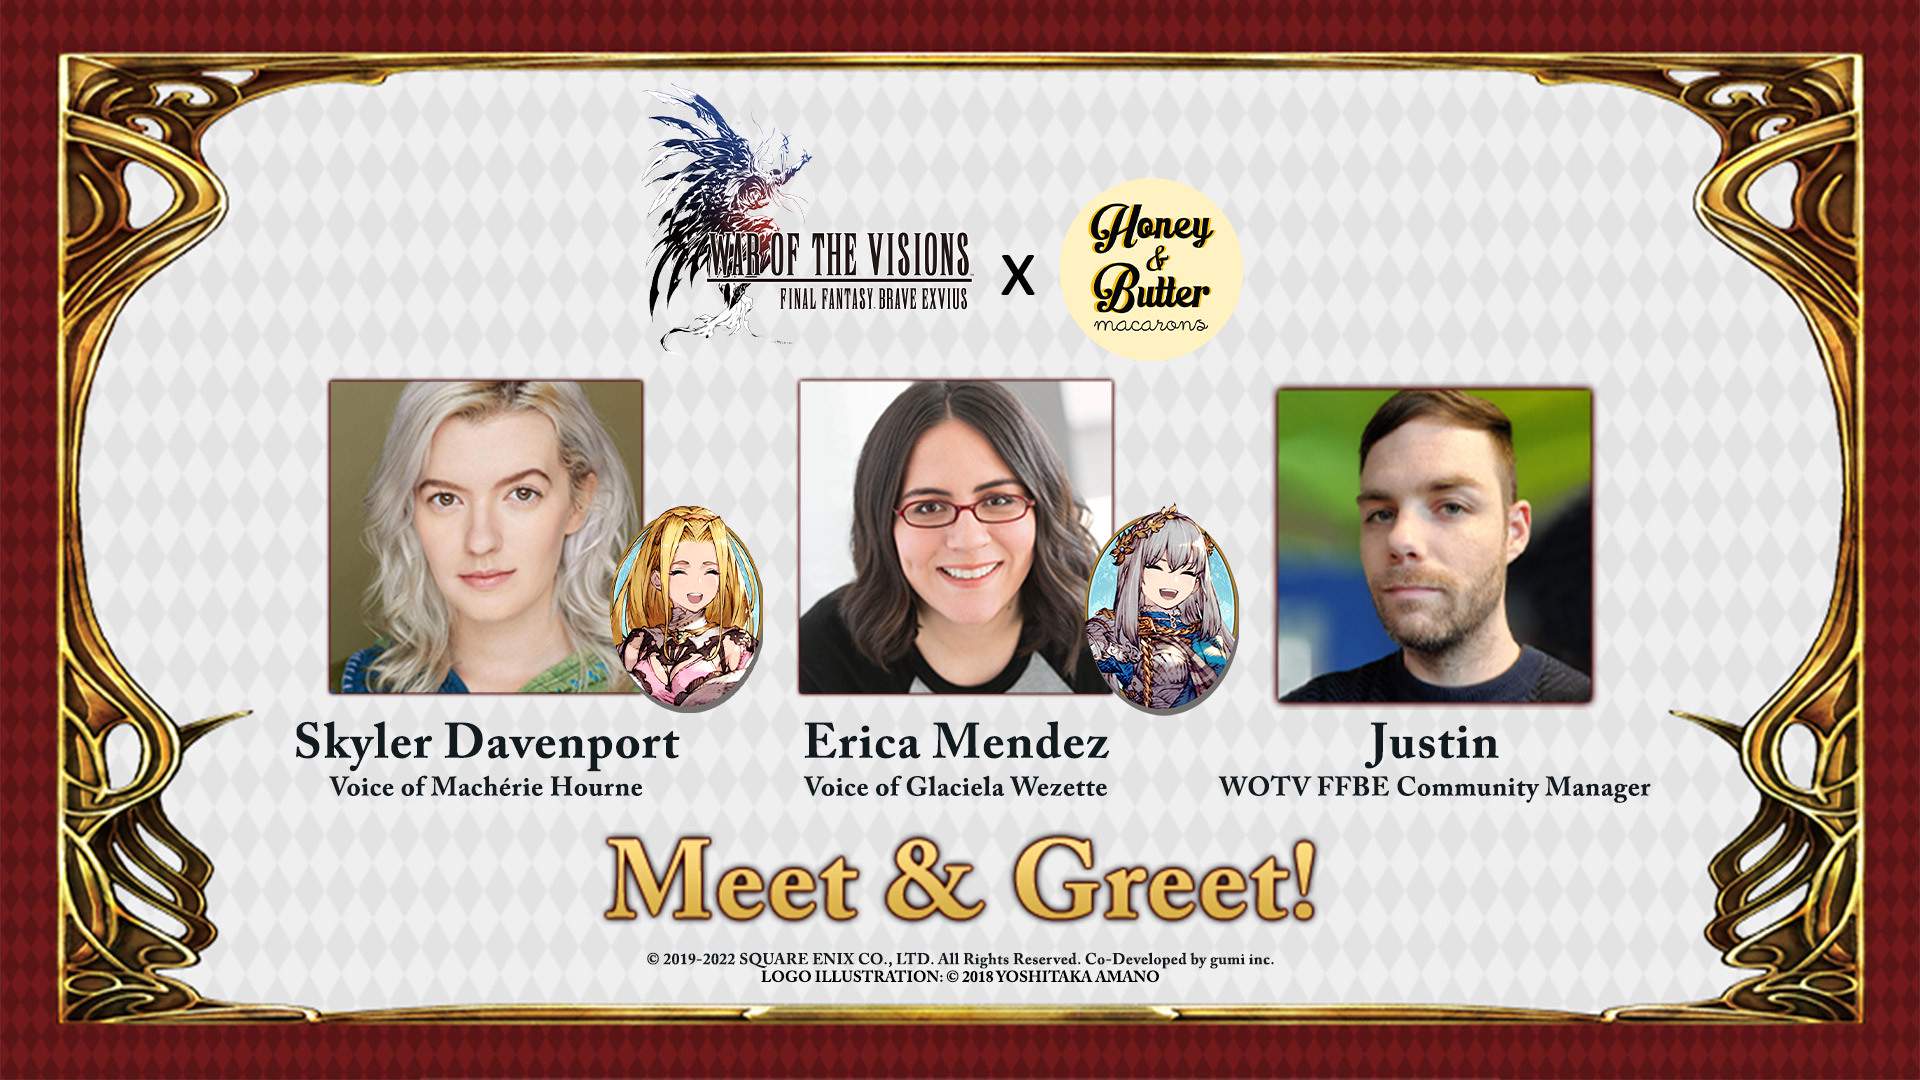 WOTV FFBE voice actors Skyler Davenport, Erica Mendez, and community manager Justin Meet and Greet 